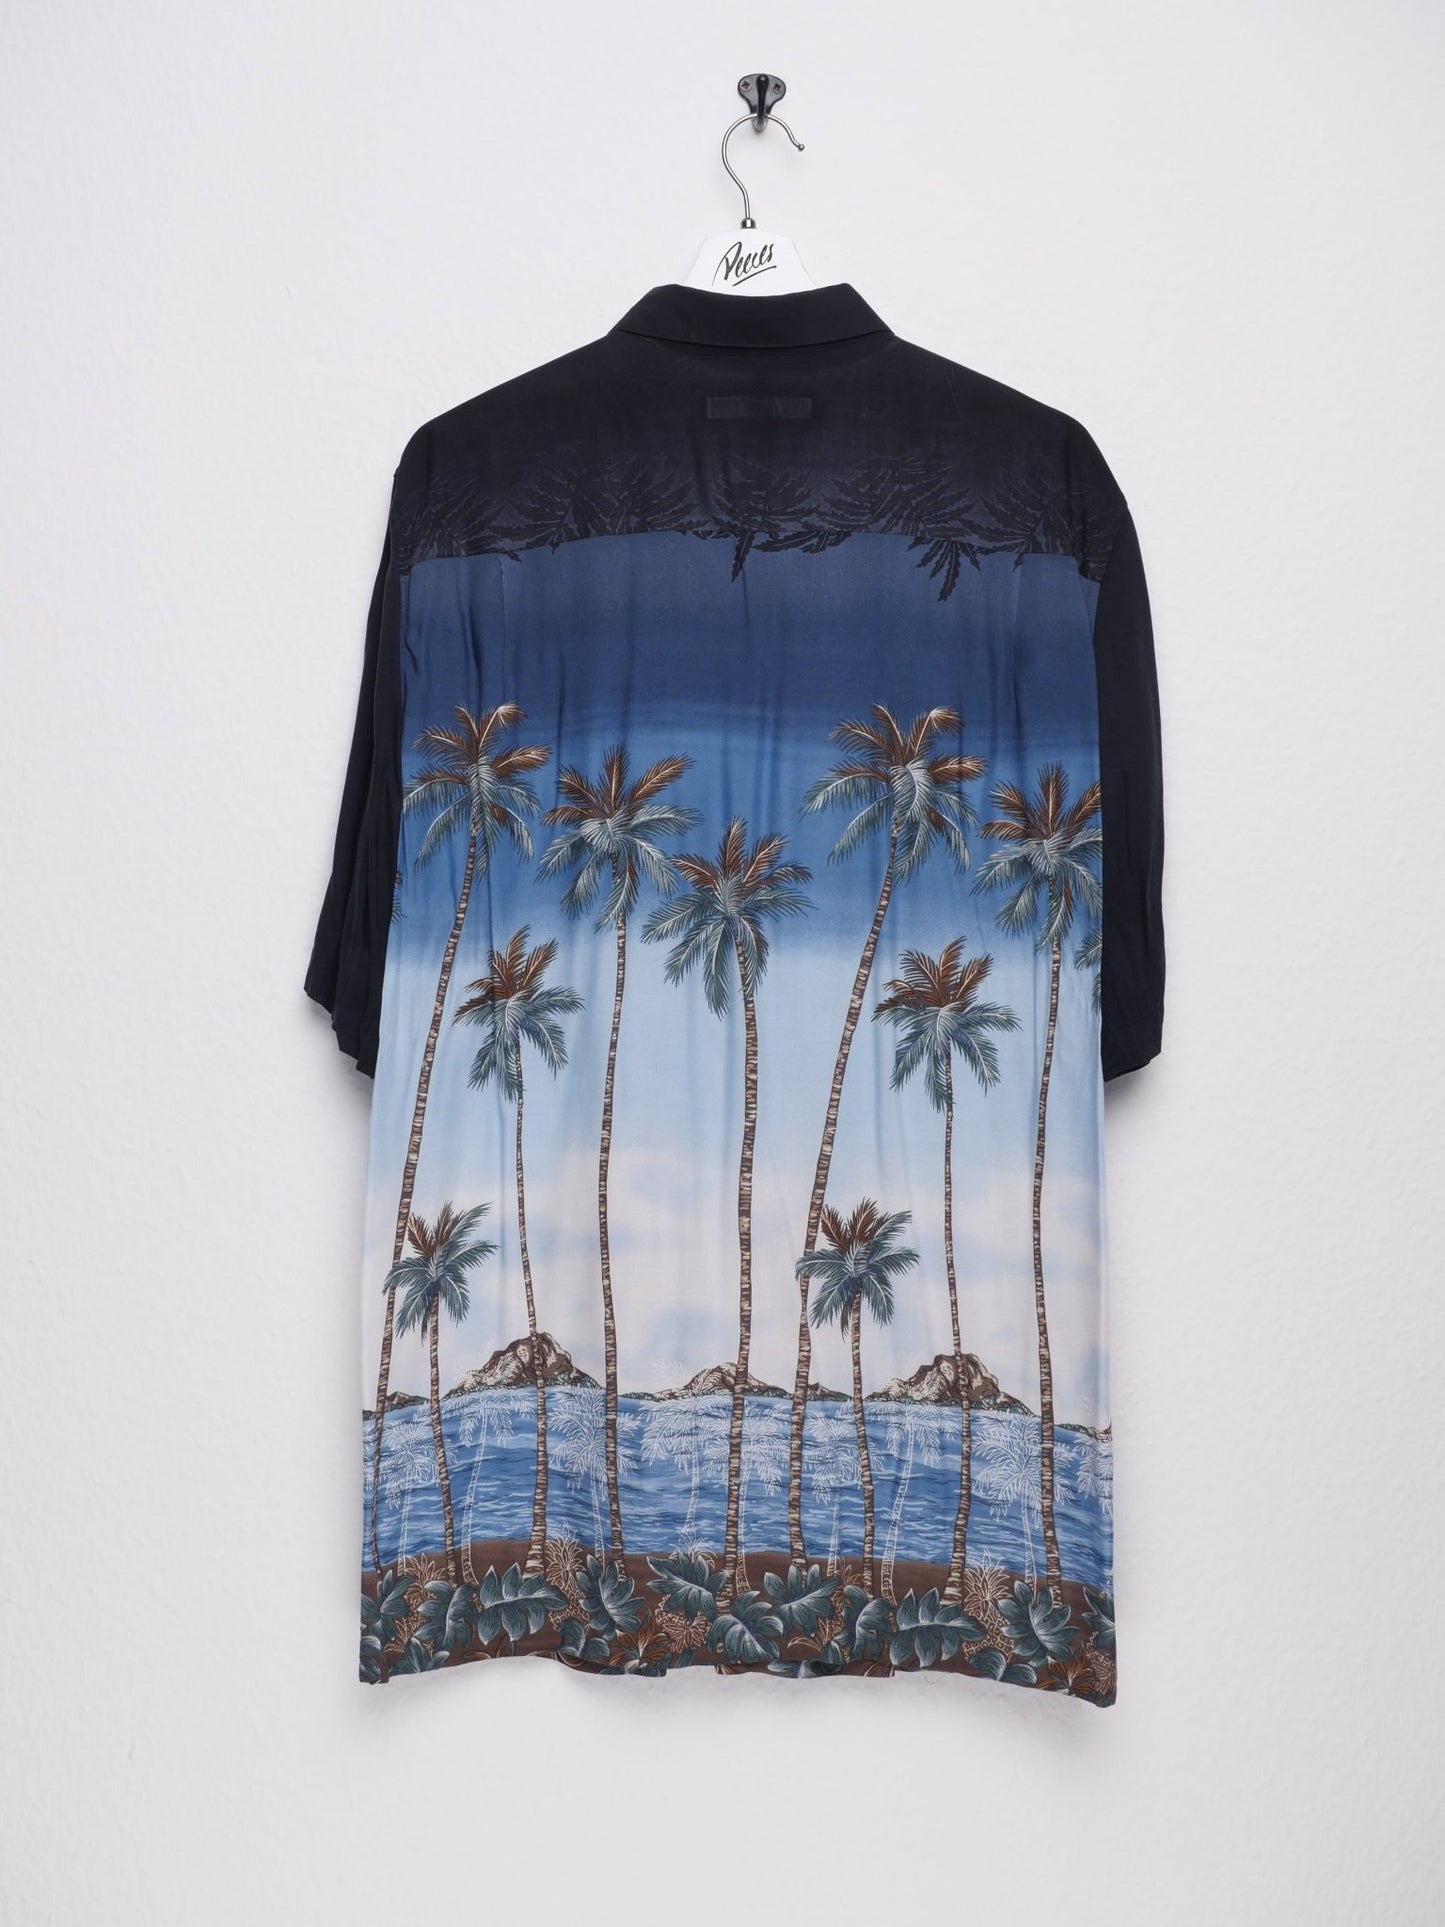 'Palms' printed Graphic multicolored S/S Hemd - Peeces